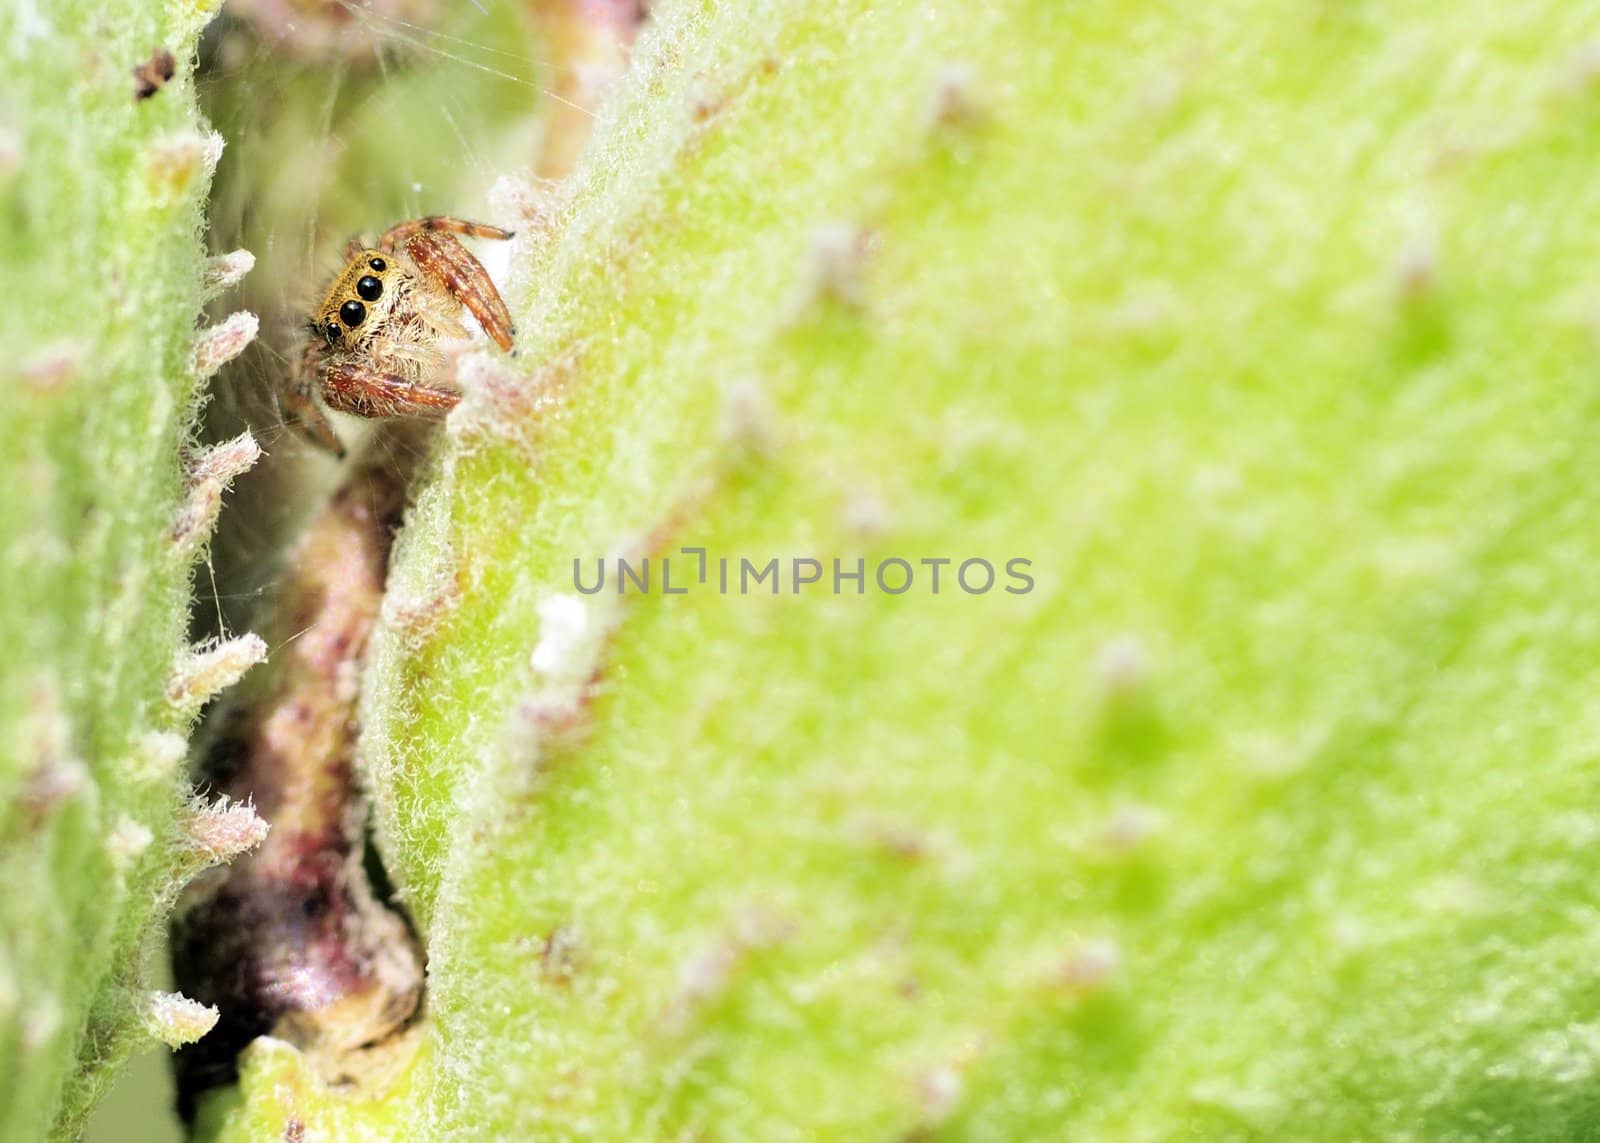 A jumping spider in between two milkweed pods waiting on prey.